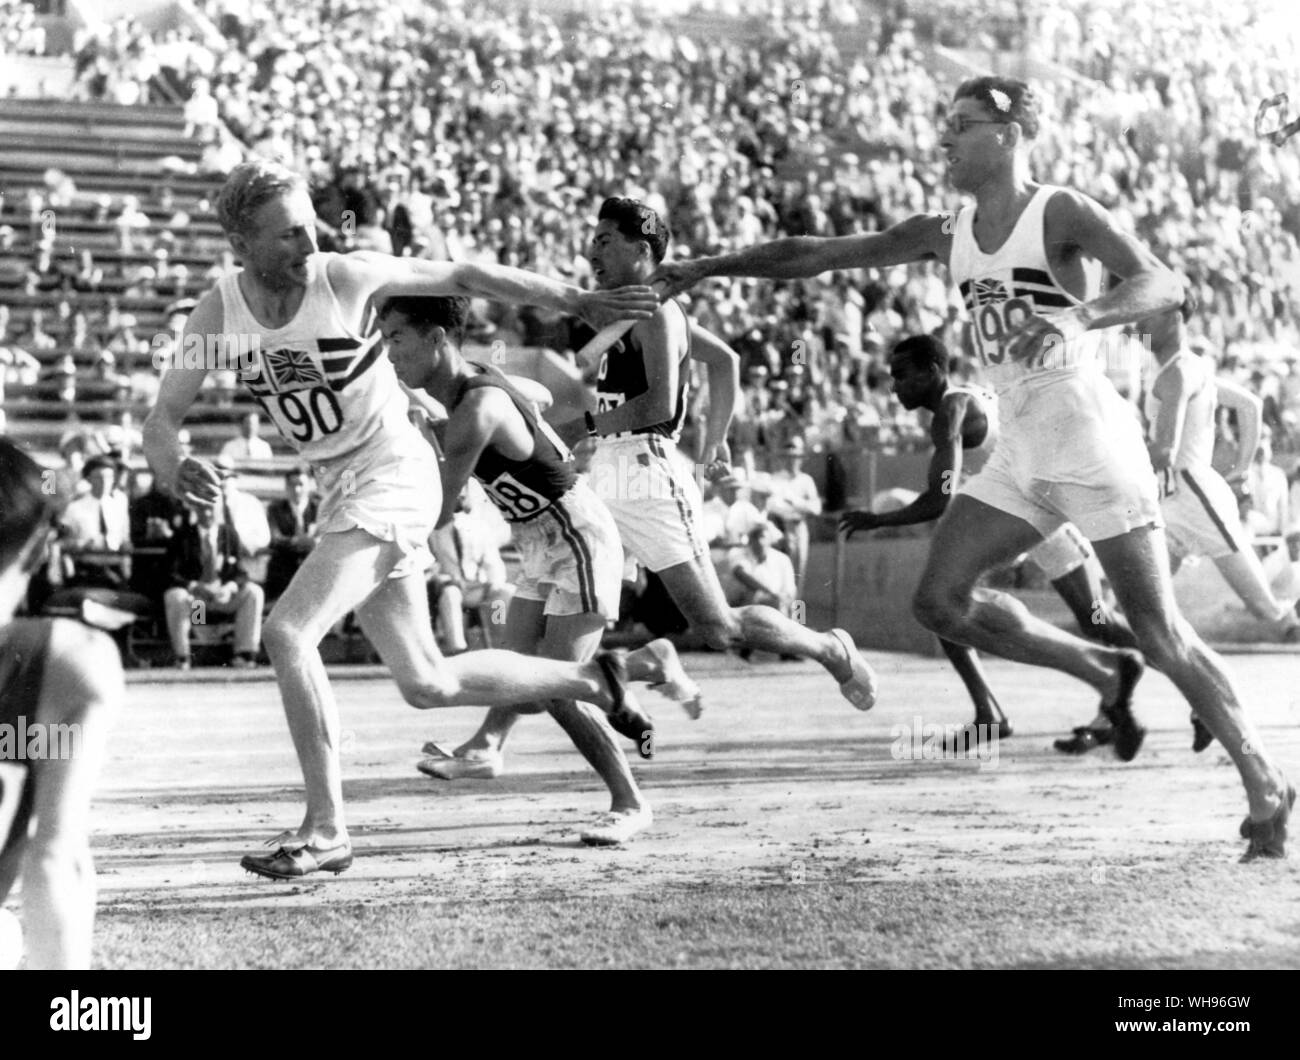 the-japanese-and-british-teams-are-shown-passing-the-baton-in-the-400-metre-relay-heats-left-to-right-lord-burghley-great-britain-oki-japan-masuda-japan-thomas-hampson-great-britain-japan-won-the-relay-heat-olympic-games-los-angeles-1932-WH96GW.jpg